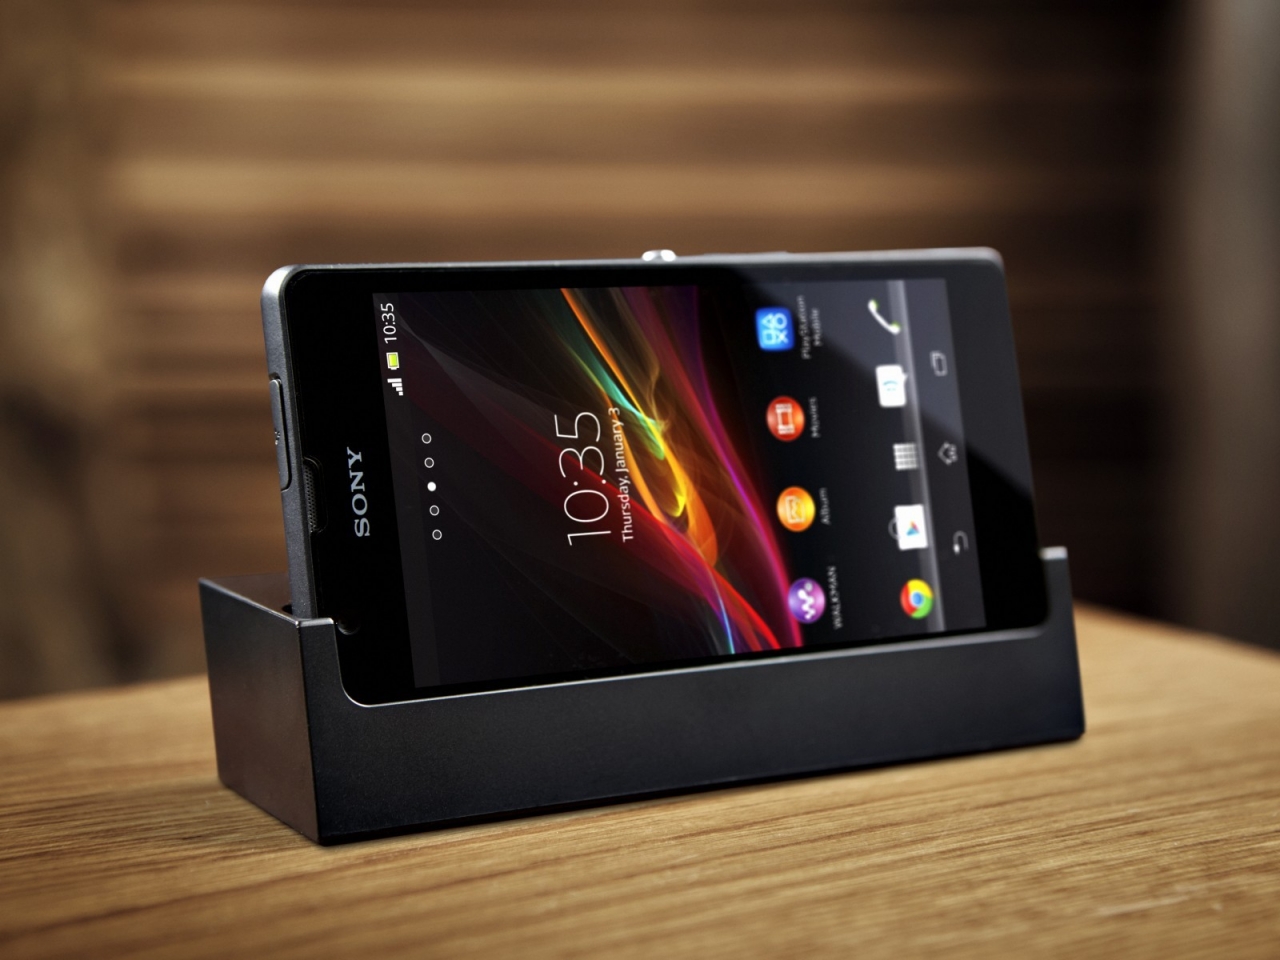 Xperia ZR for 1280 x 960 resolution